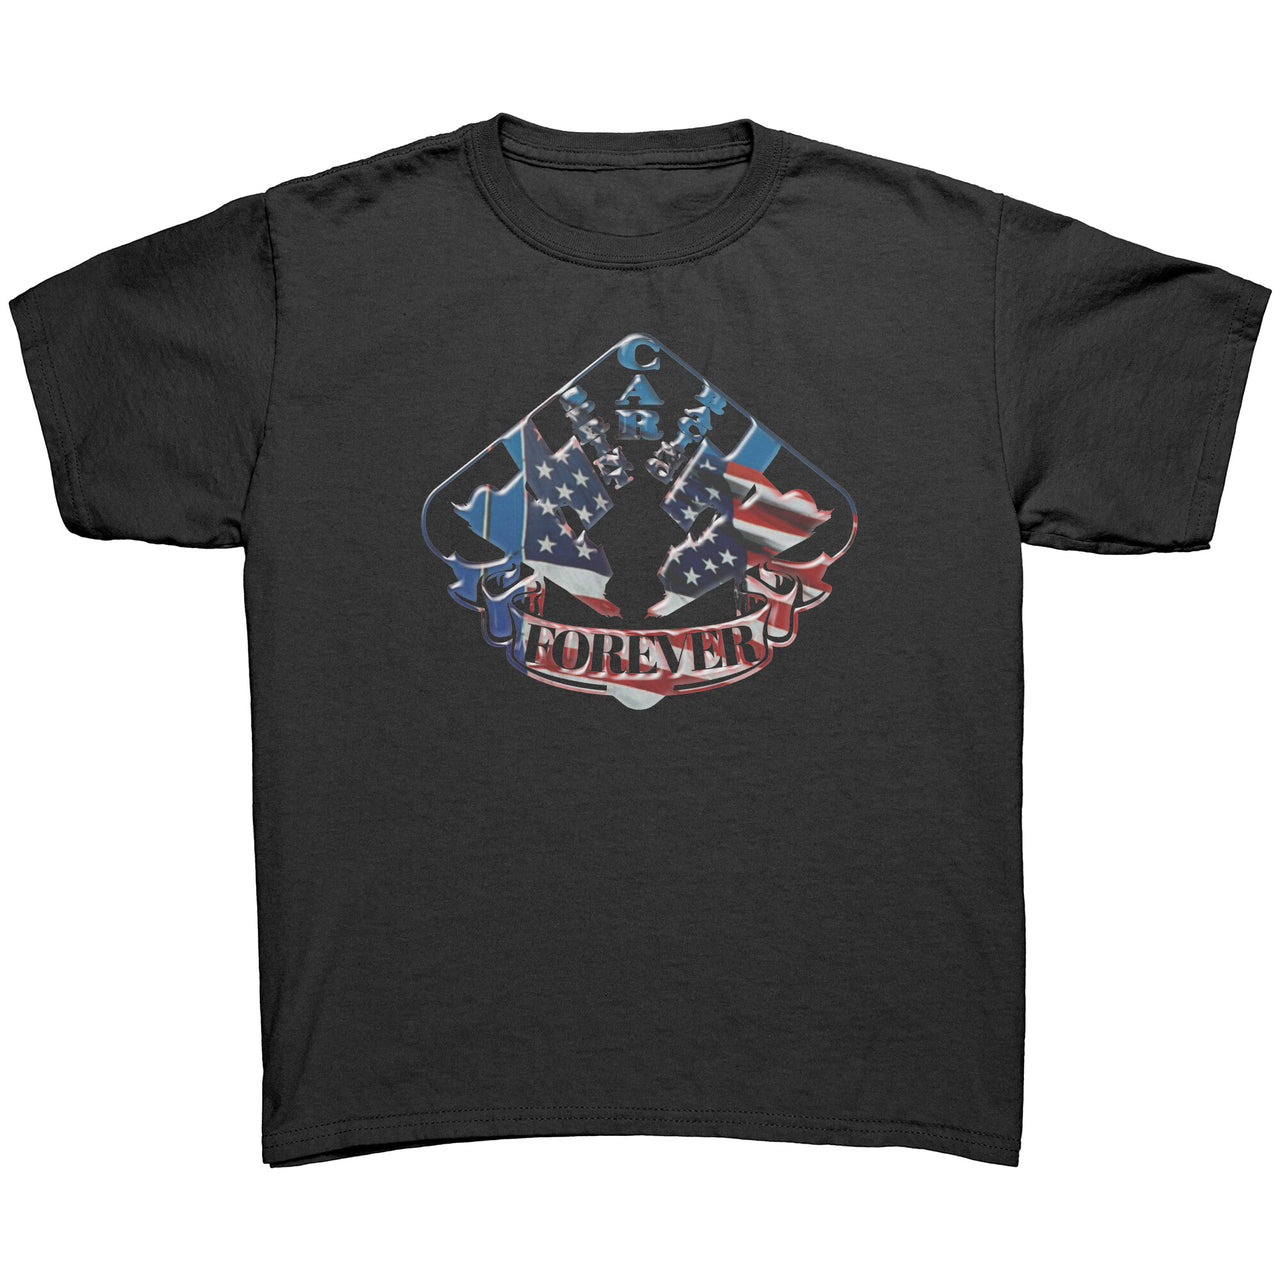 USA Sprint Car Racing Forever Youth T-shirts/Hoodies